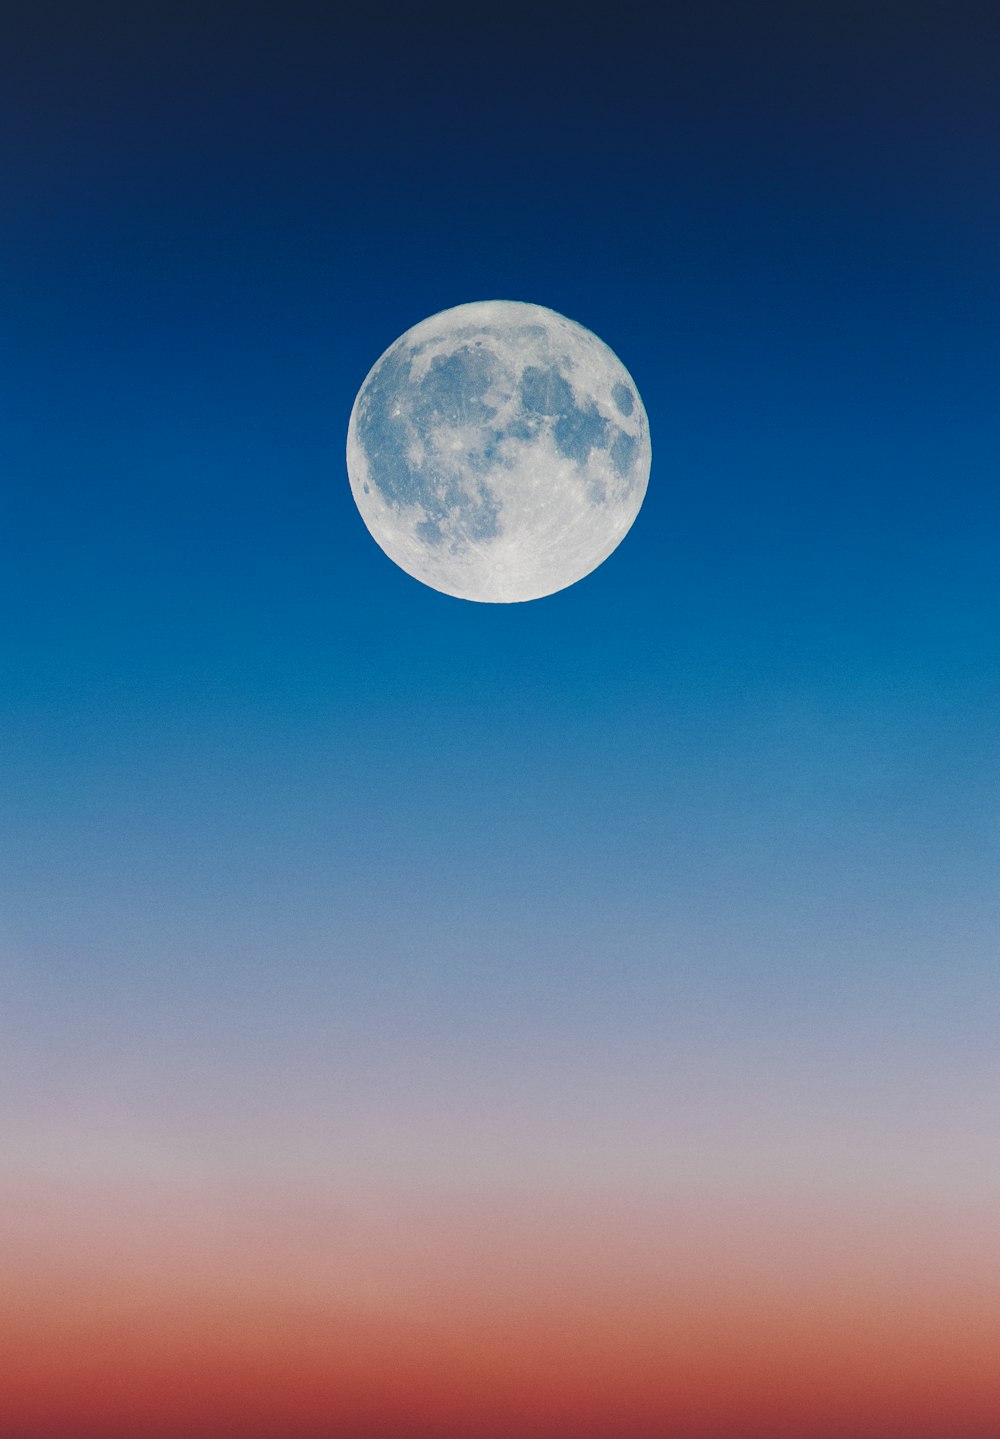 Moon Rise Pictures Download Free Images on Unsplash